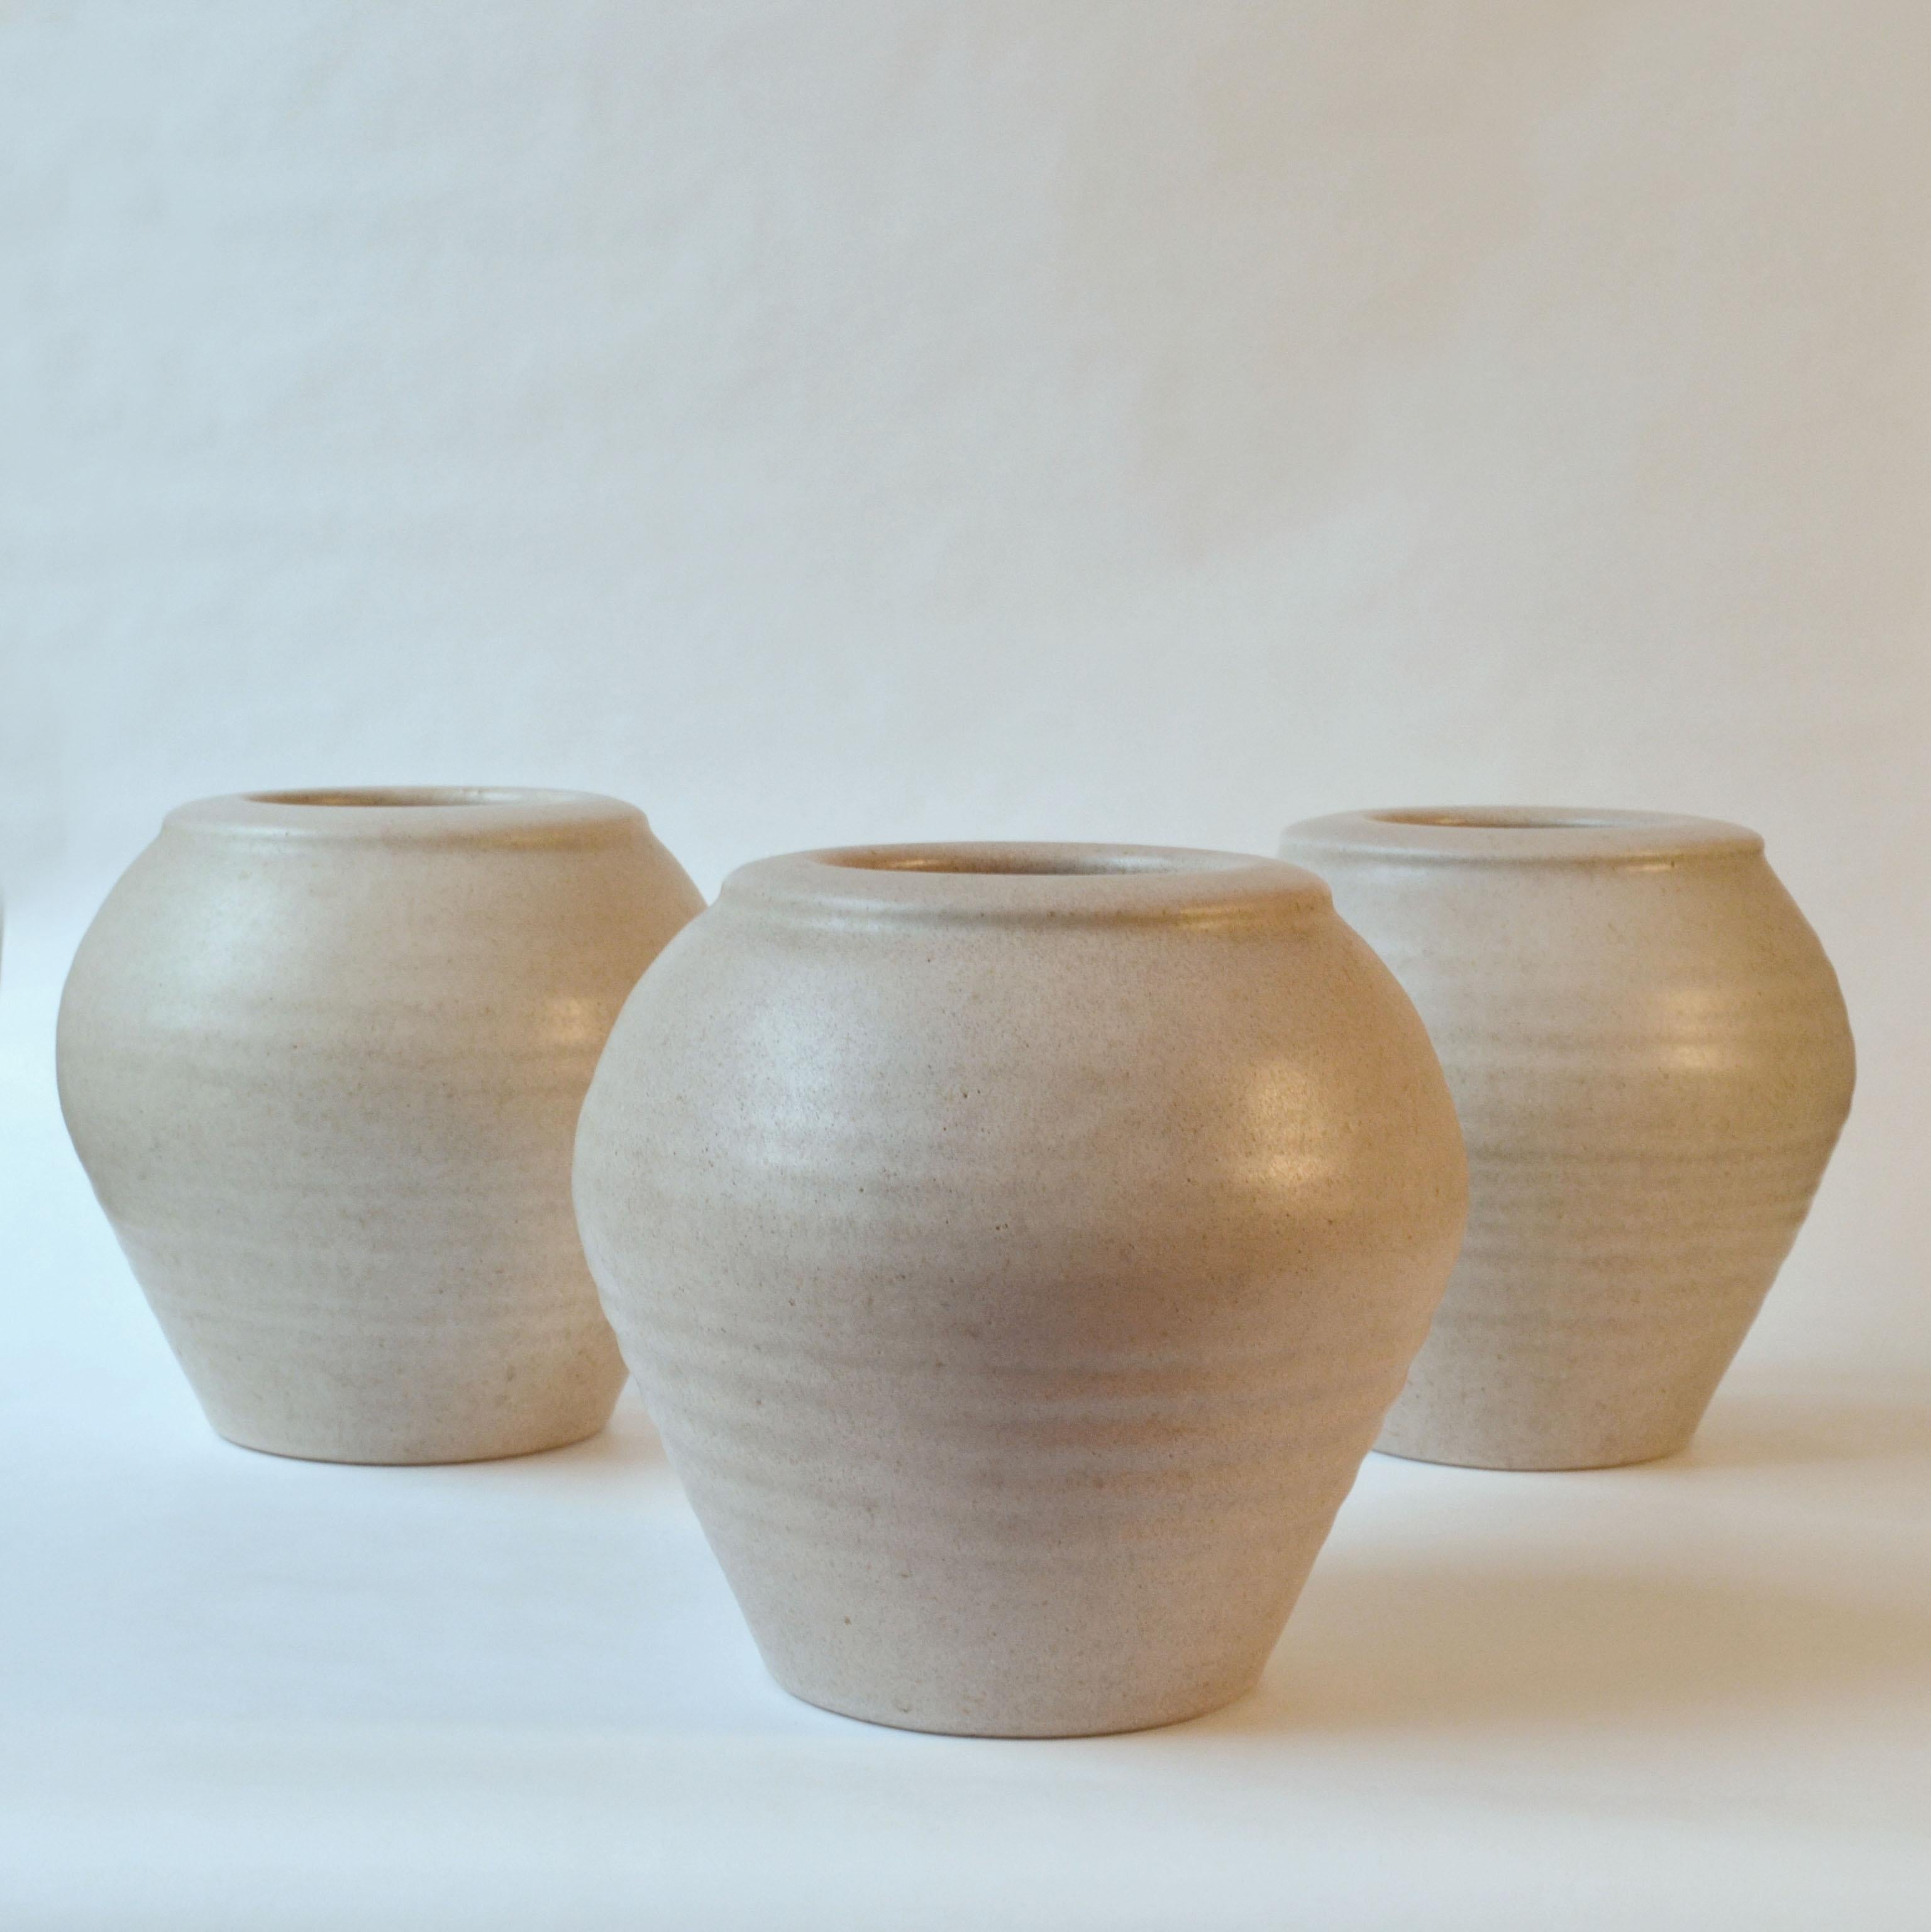 Set of studio pottery vases turned by hand on the wheel into a urn shape with protruding lip border. They are crafted by a Dutch ceramist who required both art and skill in the 1980's. The warm ivory white glazes has tiny specks of darker tones